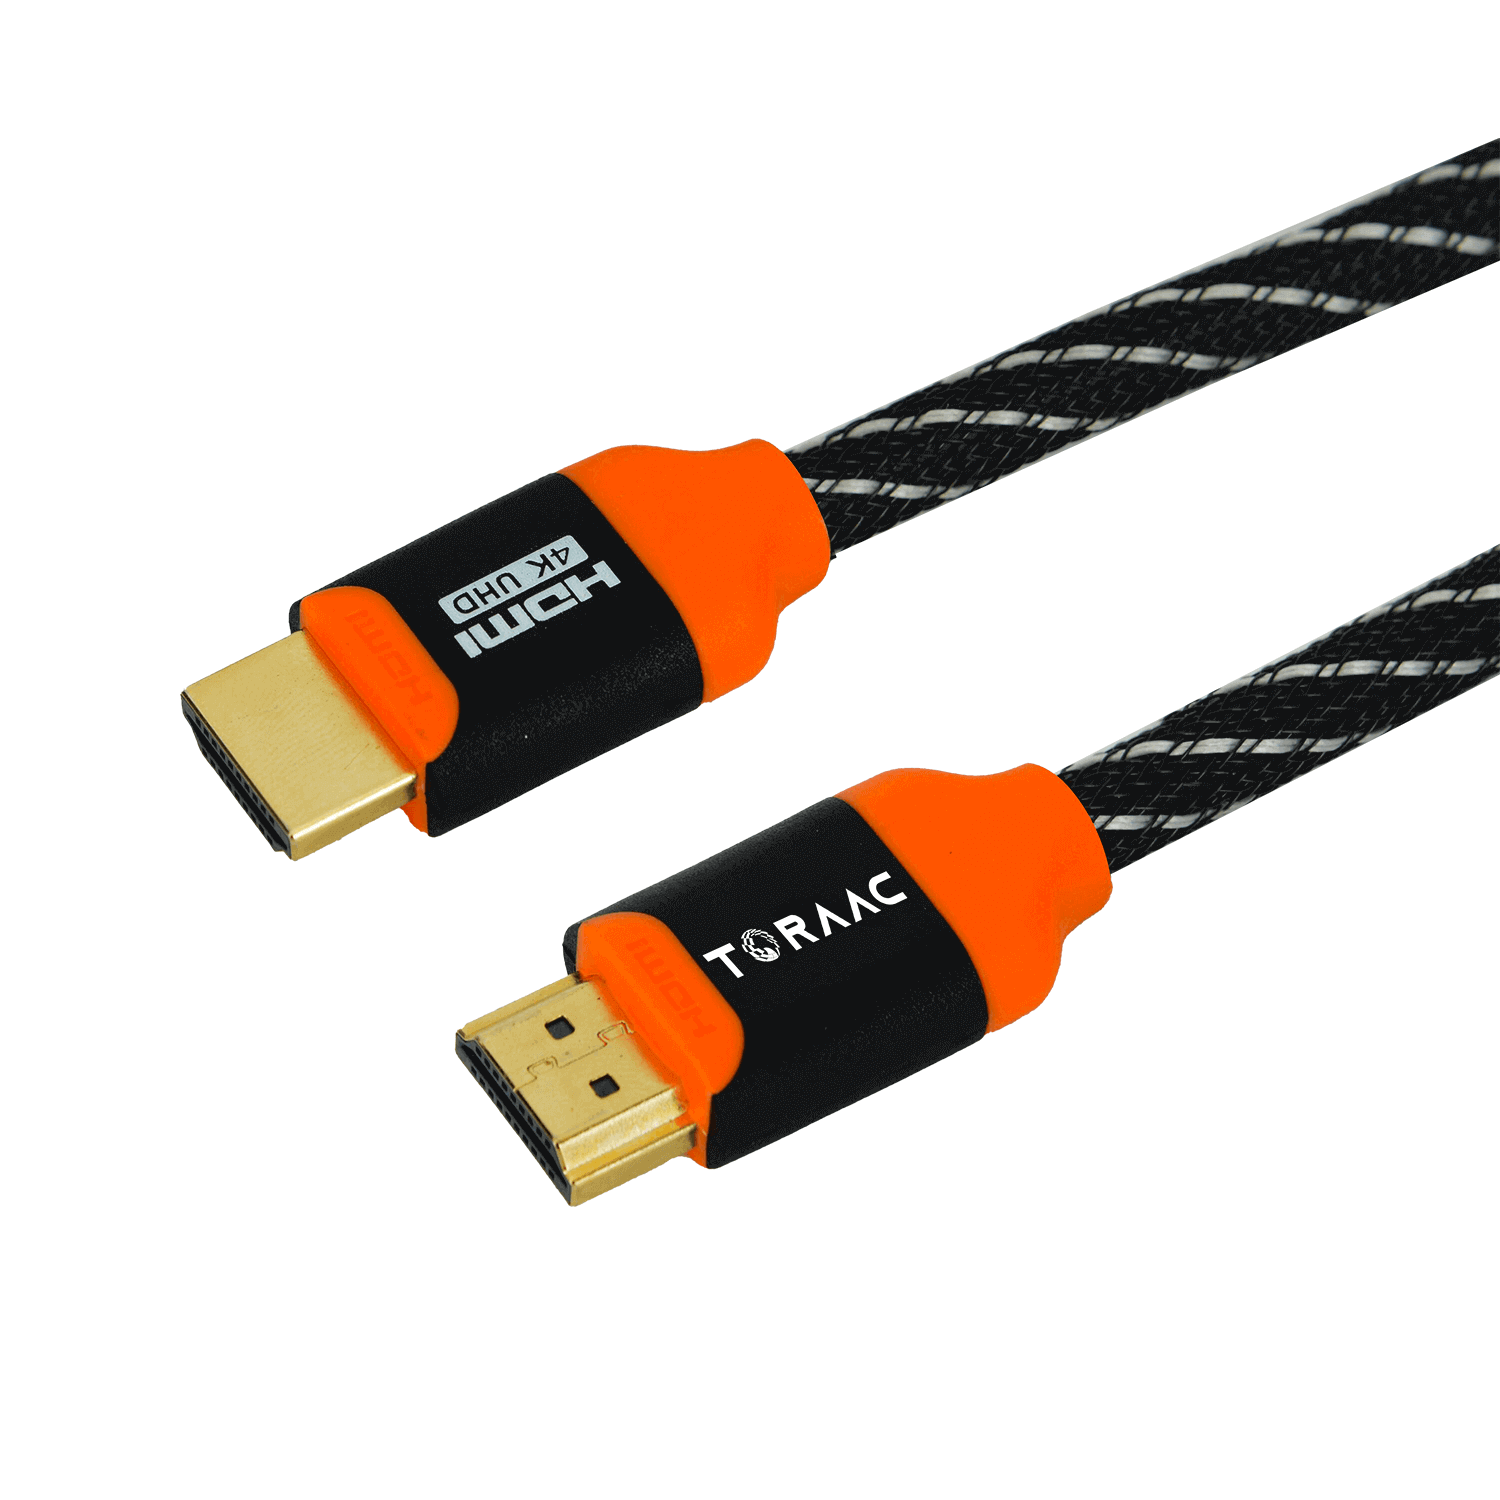 60hz cable